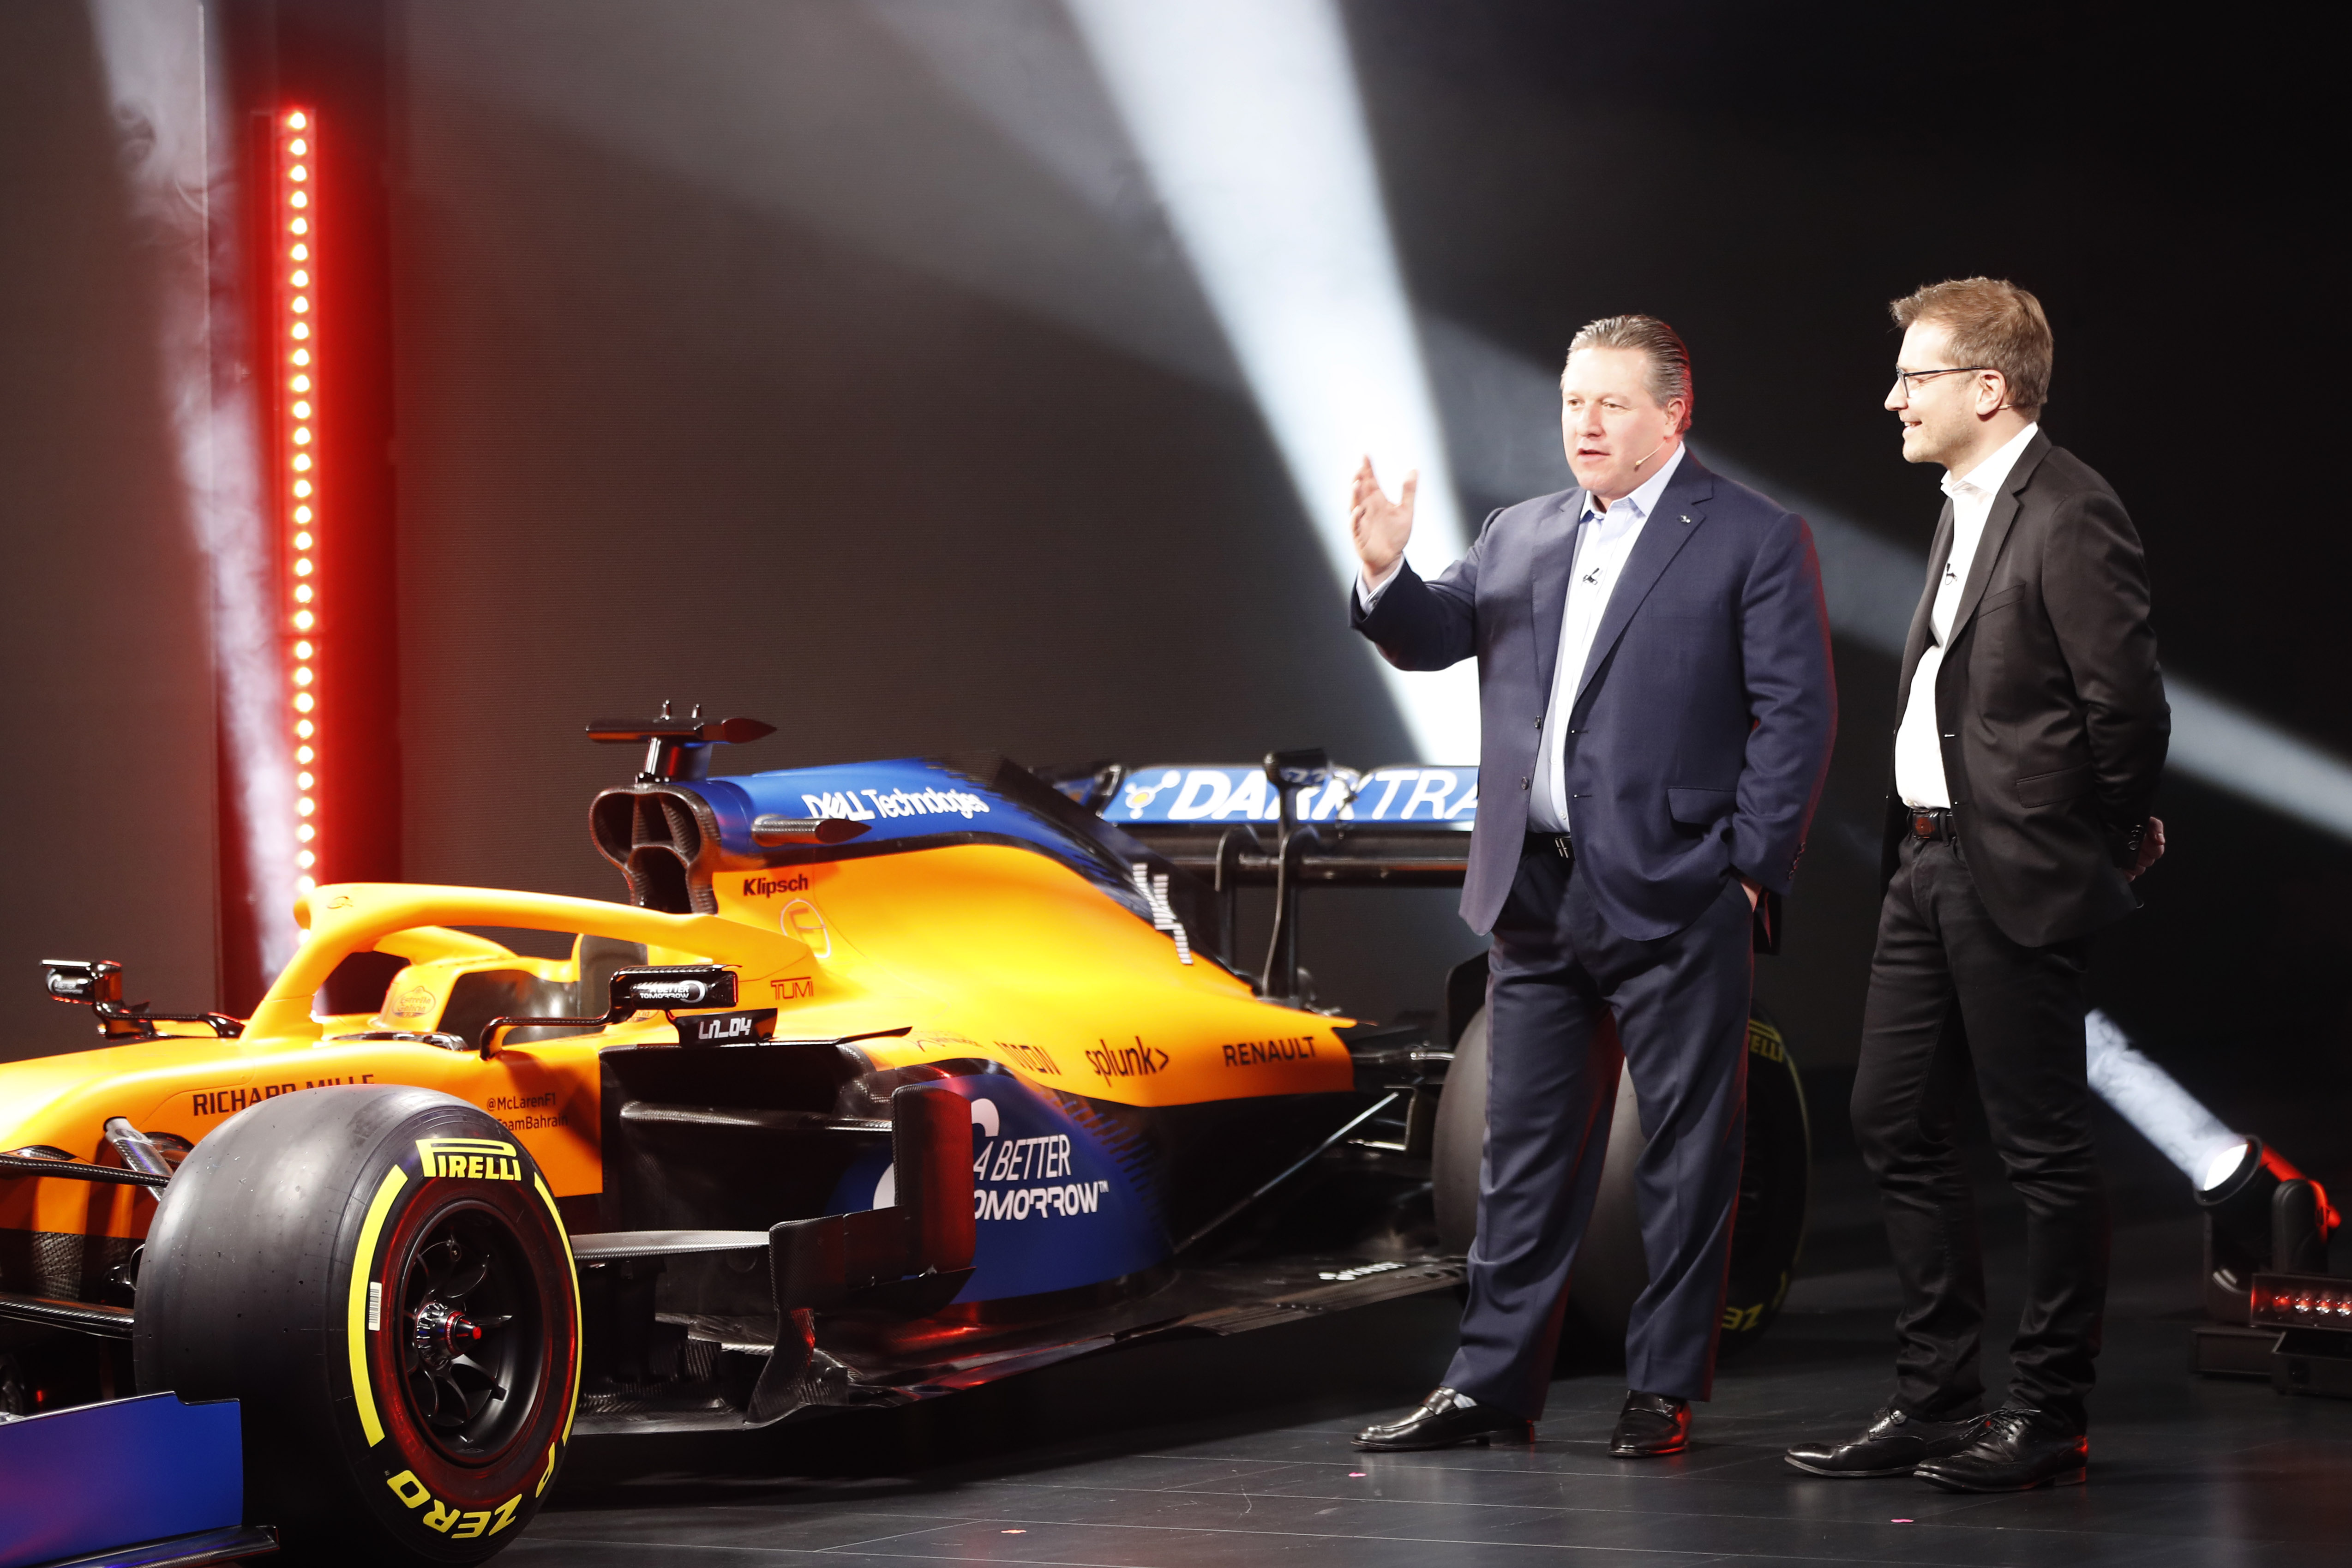 Zak Brown Andreas Seidl At The Mcl35 Launch. 13 February 2020